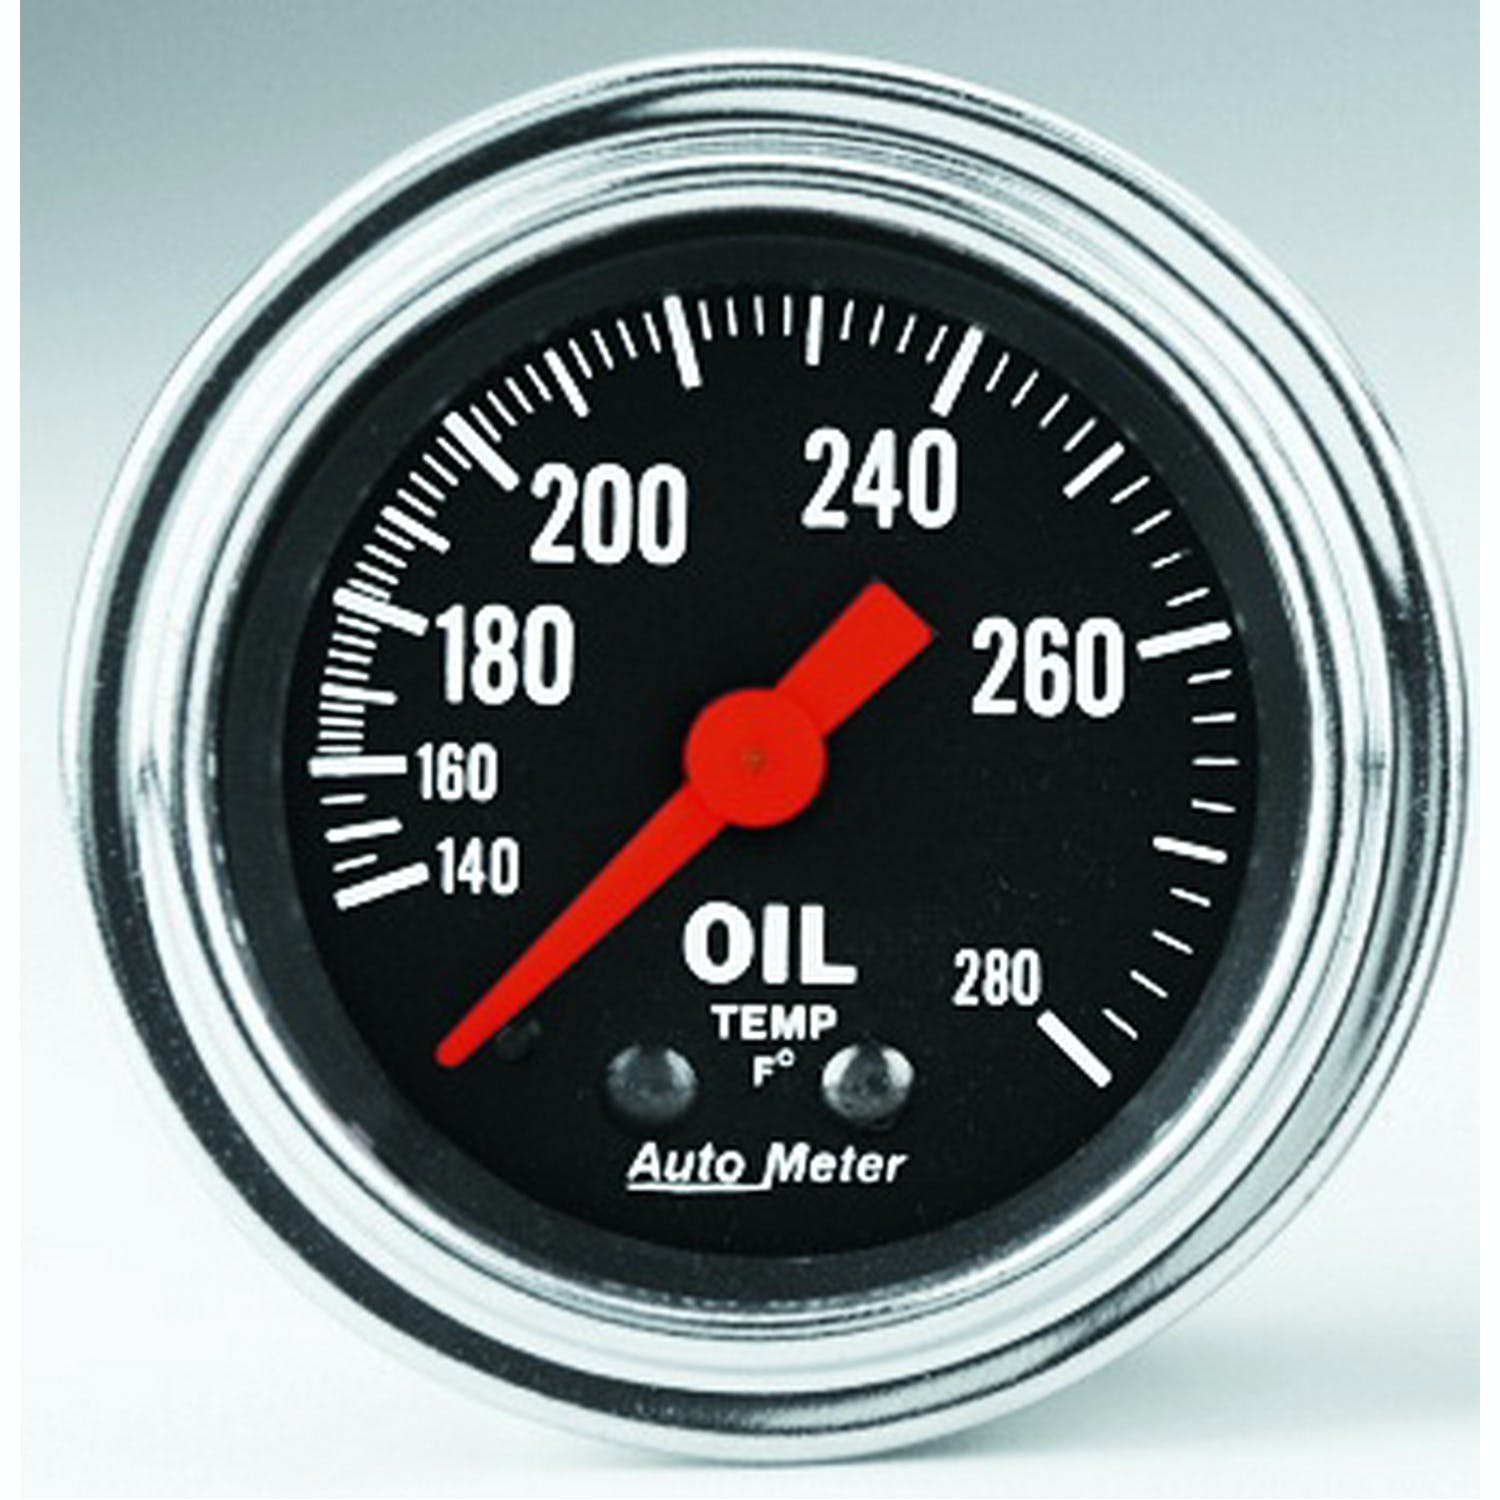 AutoMeter Products 2441 Oil Temp 140-280 F